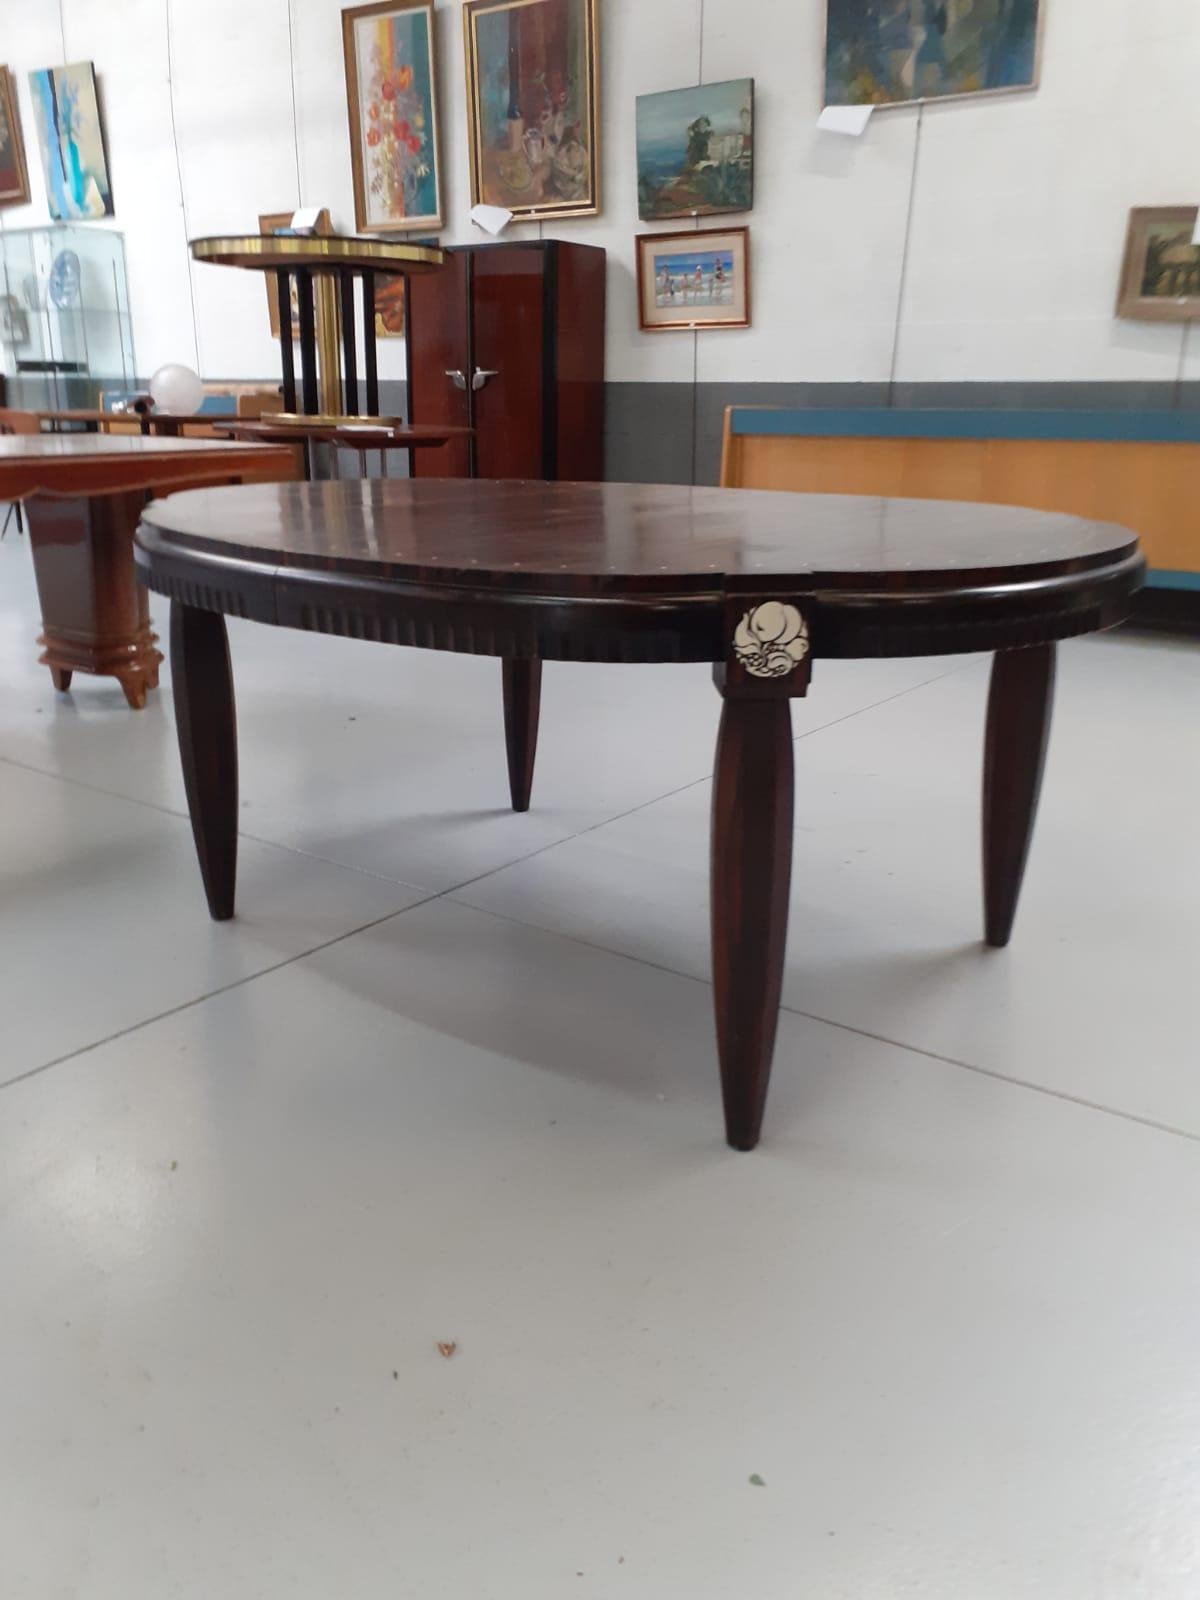 Rare large Art Deco table in Macassar Ebony and ivory circa 1925
Very nice veneer with small flaws, the varnish must be redone 
Possibility of extensions, but they are missing.